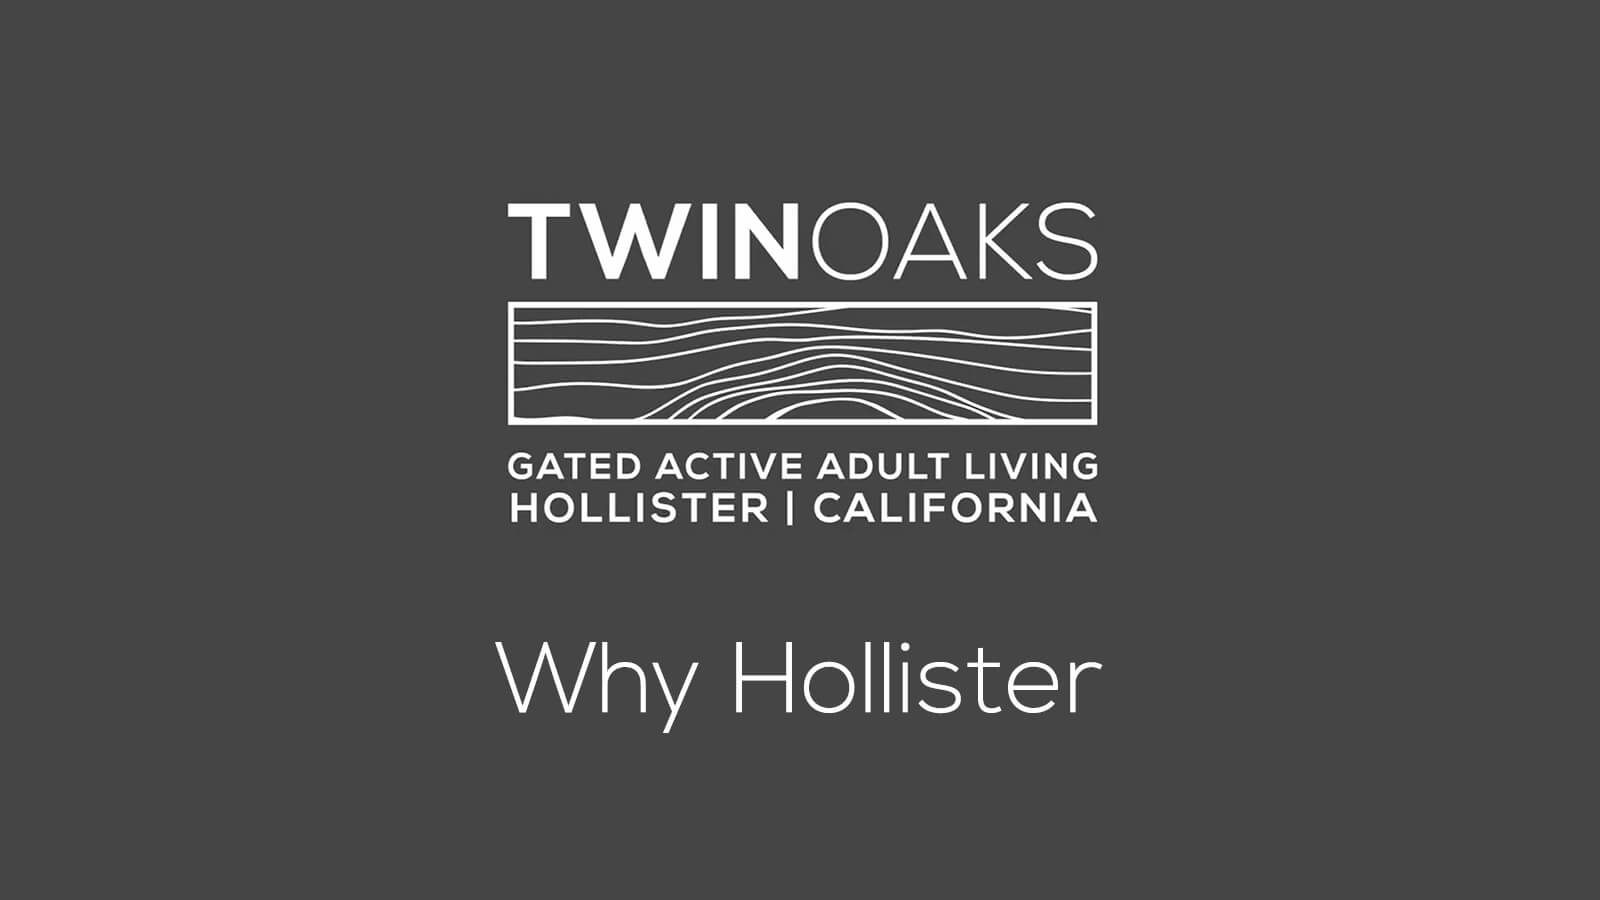 Video: Twin Oaks gated active adult living - Why Hollister